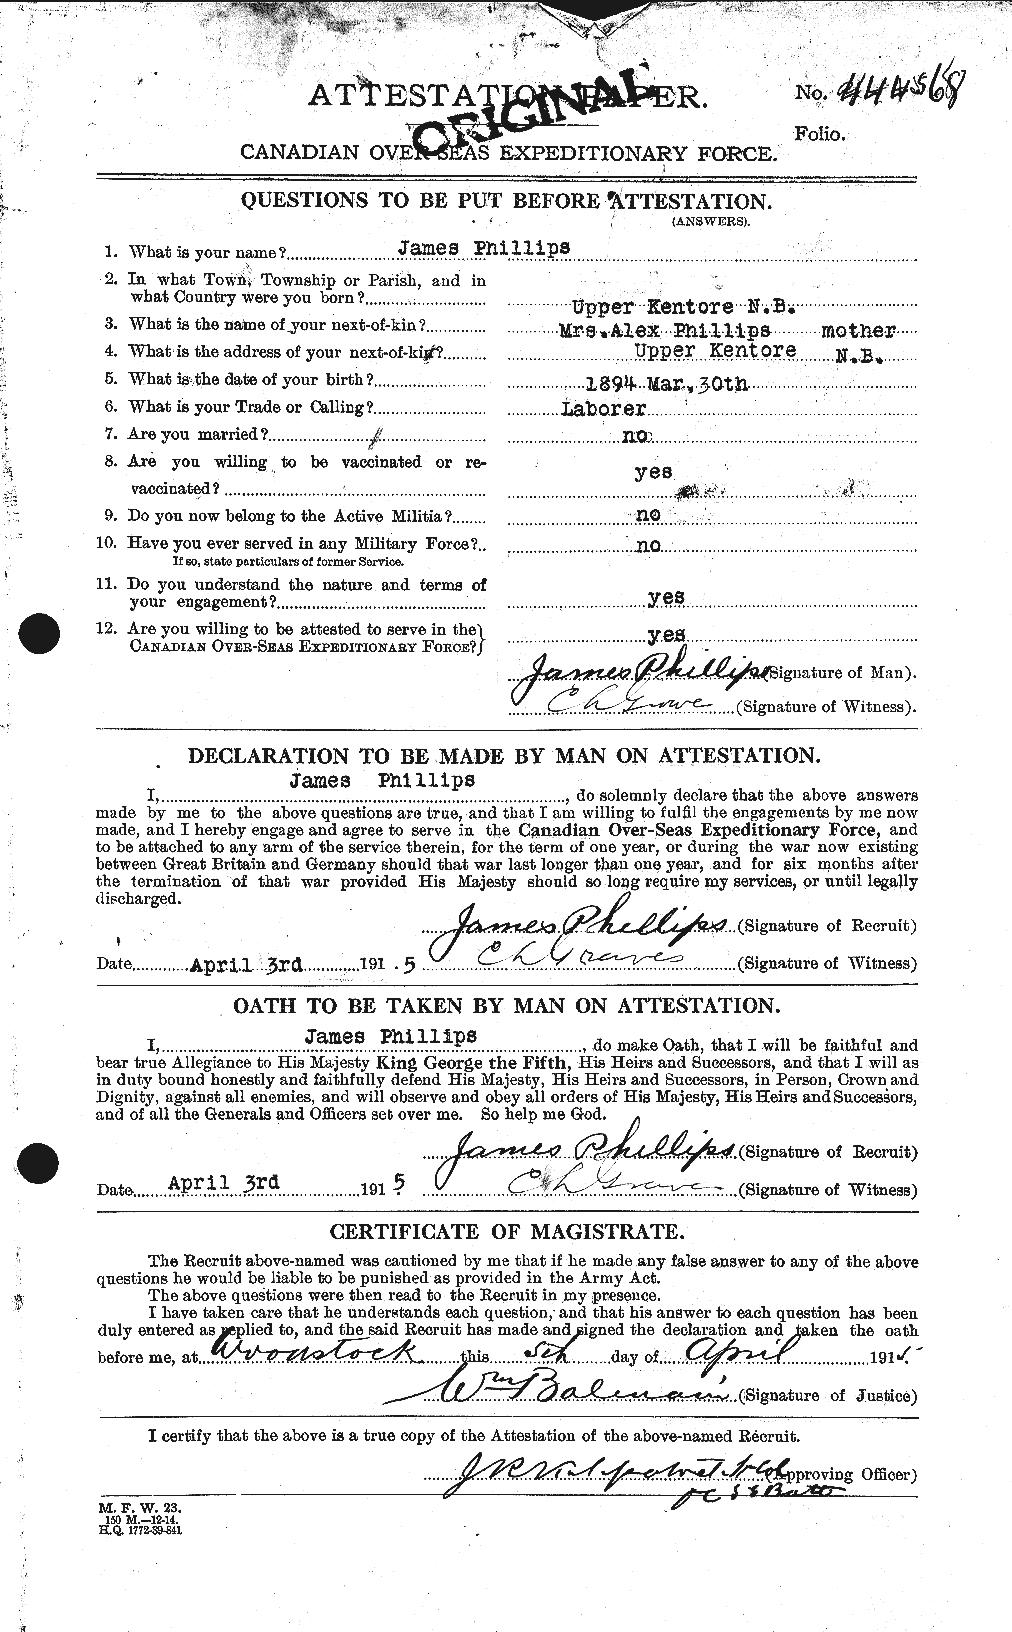 Personnel Records of the First World War - CEF 577630a